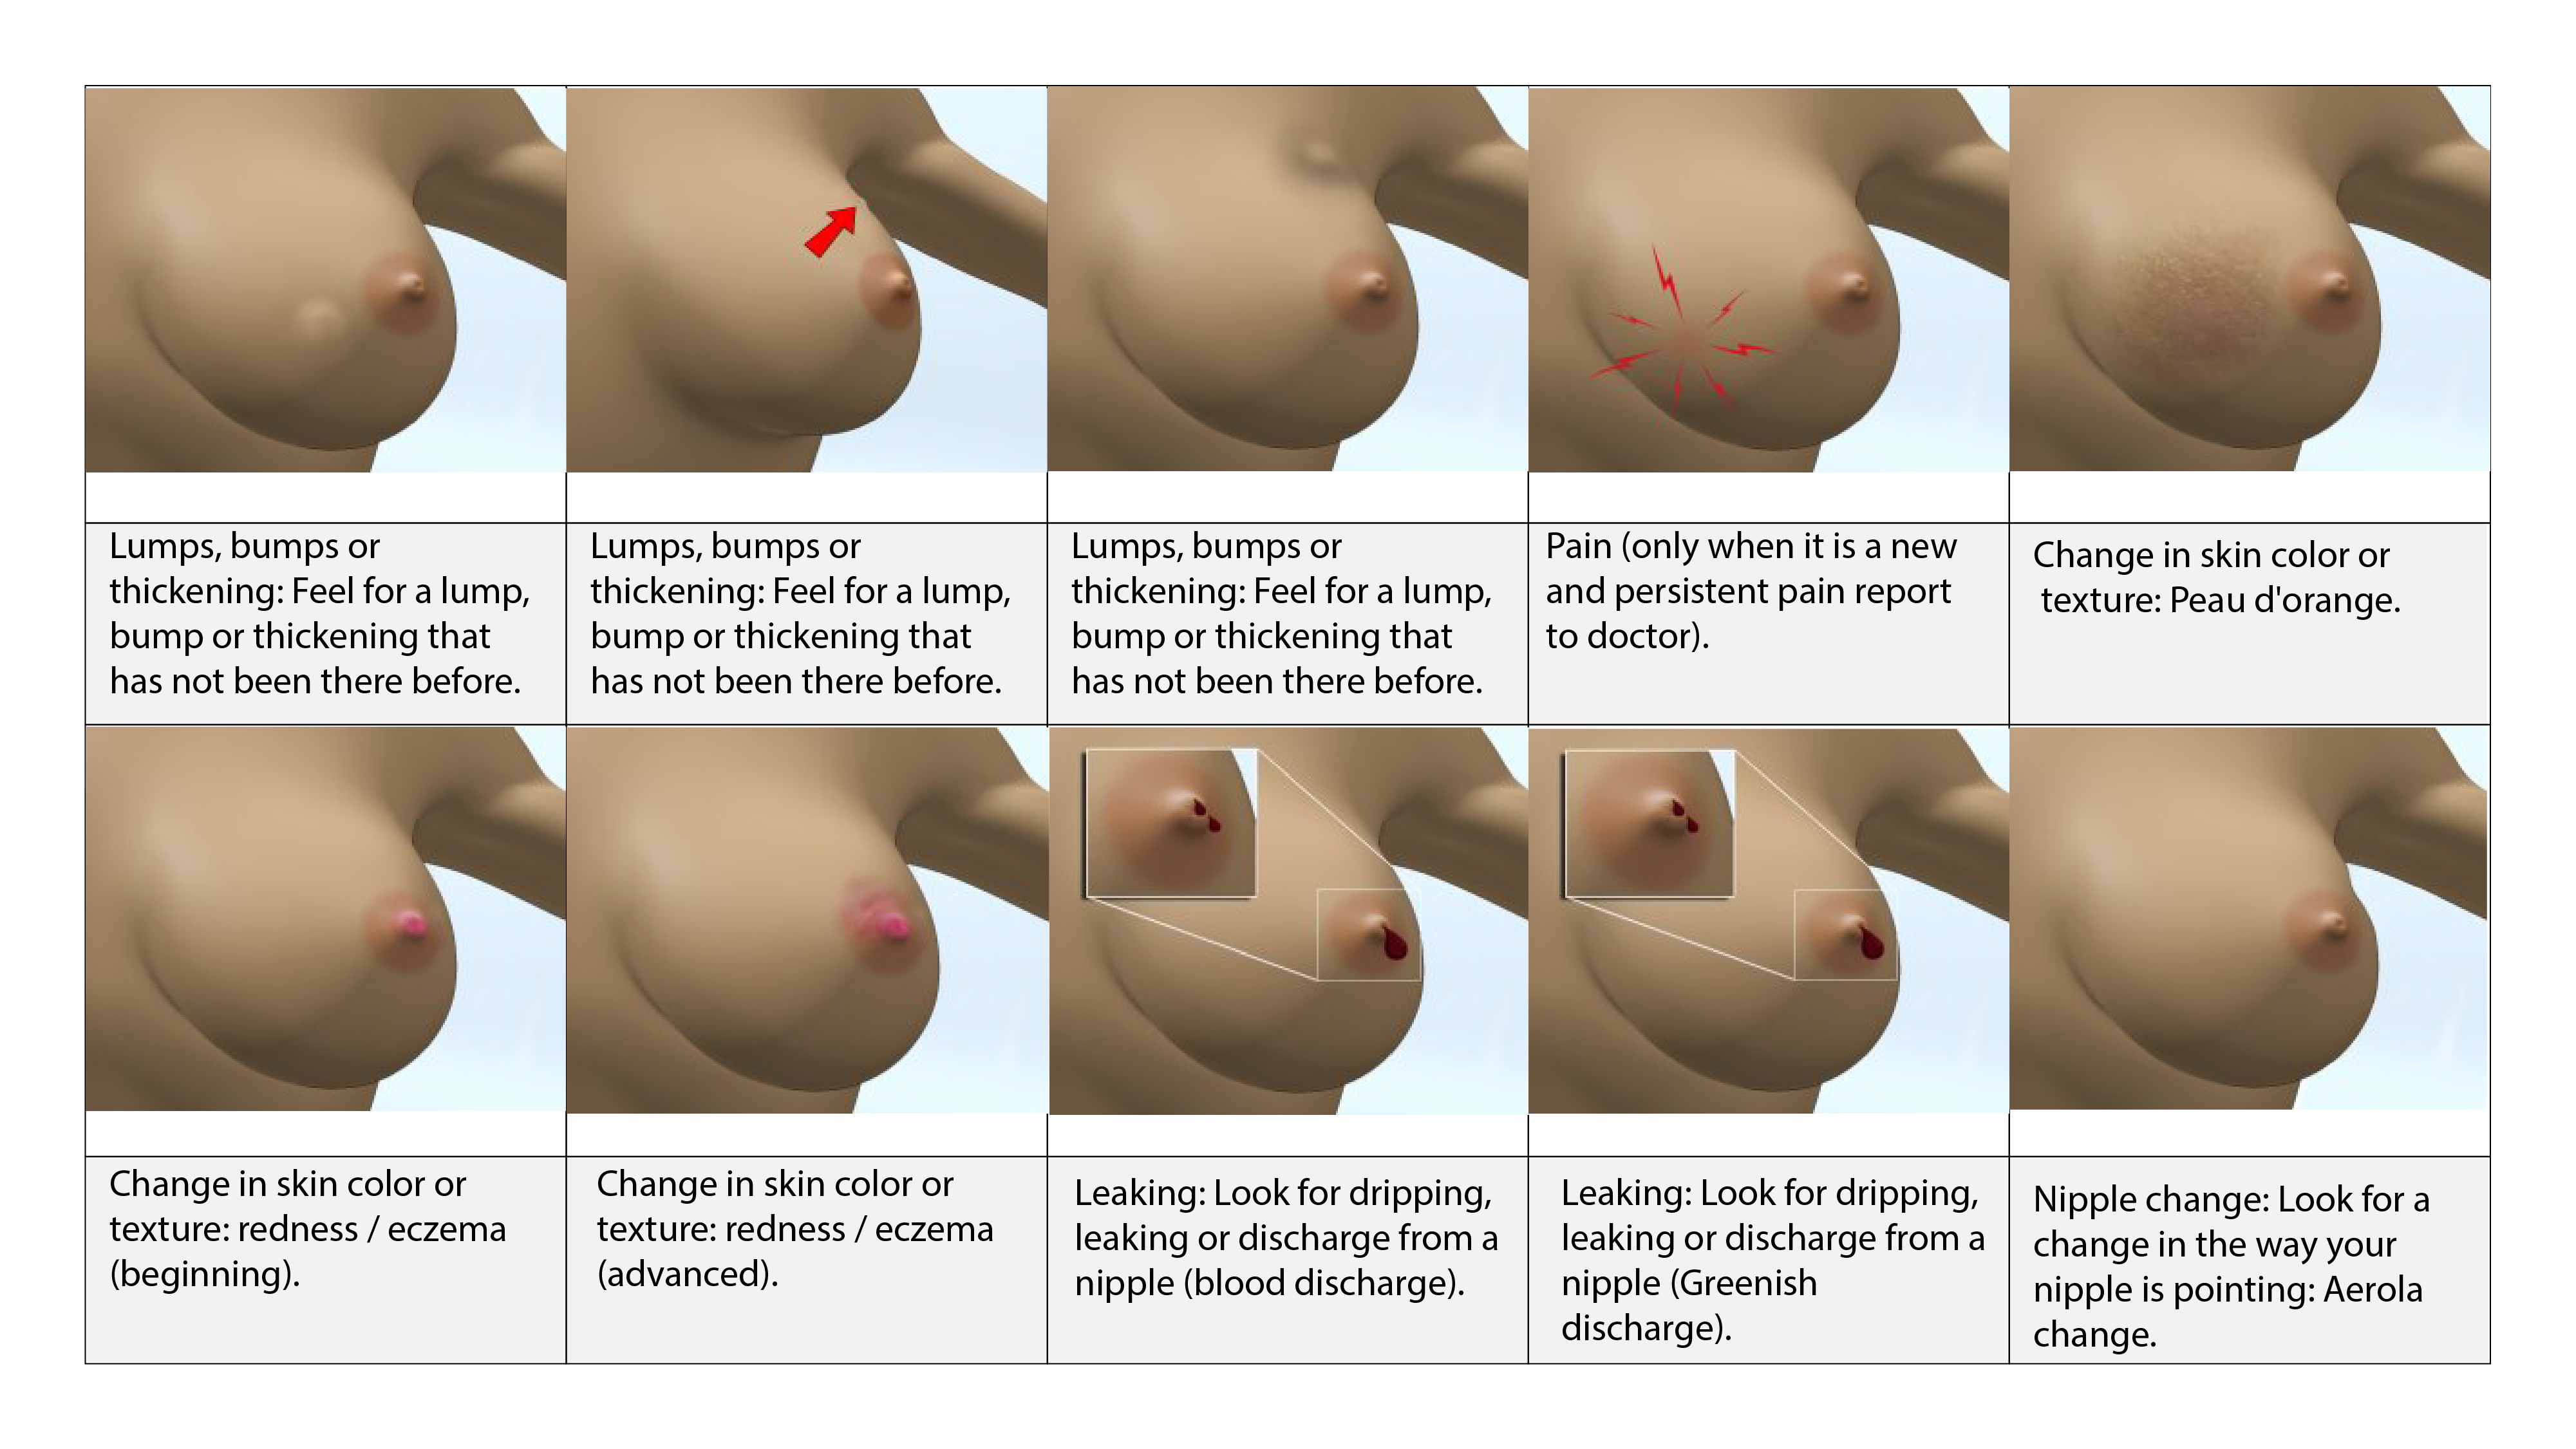 BREAST CANCER / BREAST SELF-EXAMINATION (BSE)